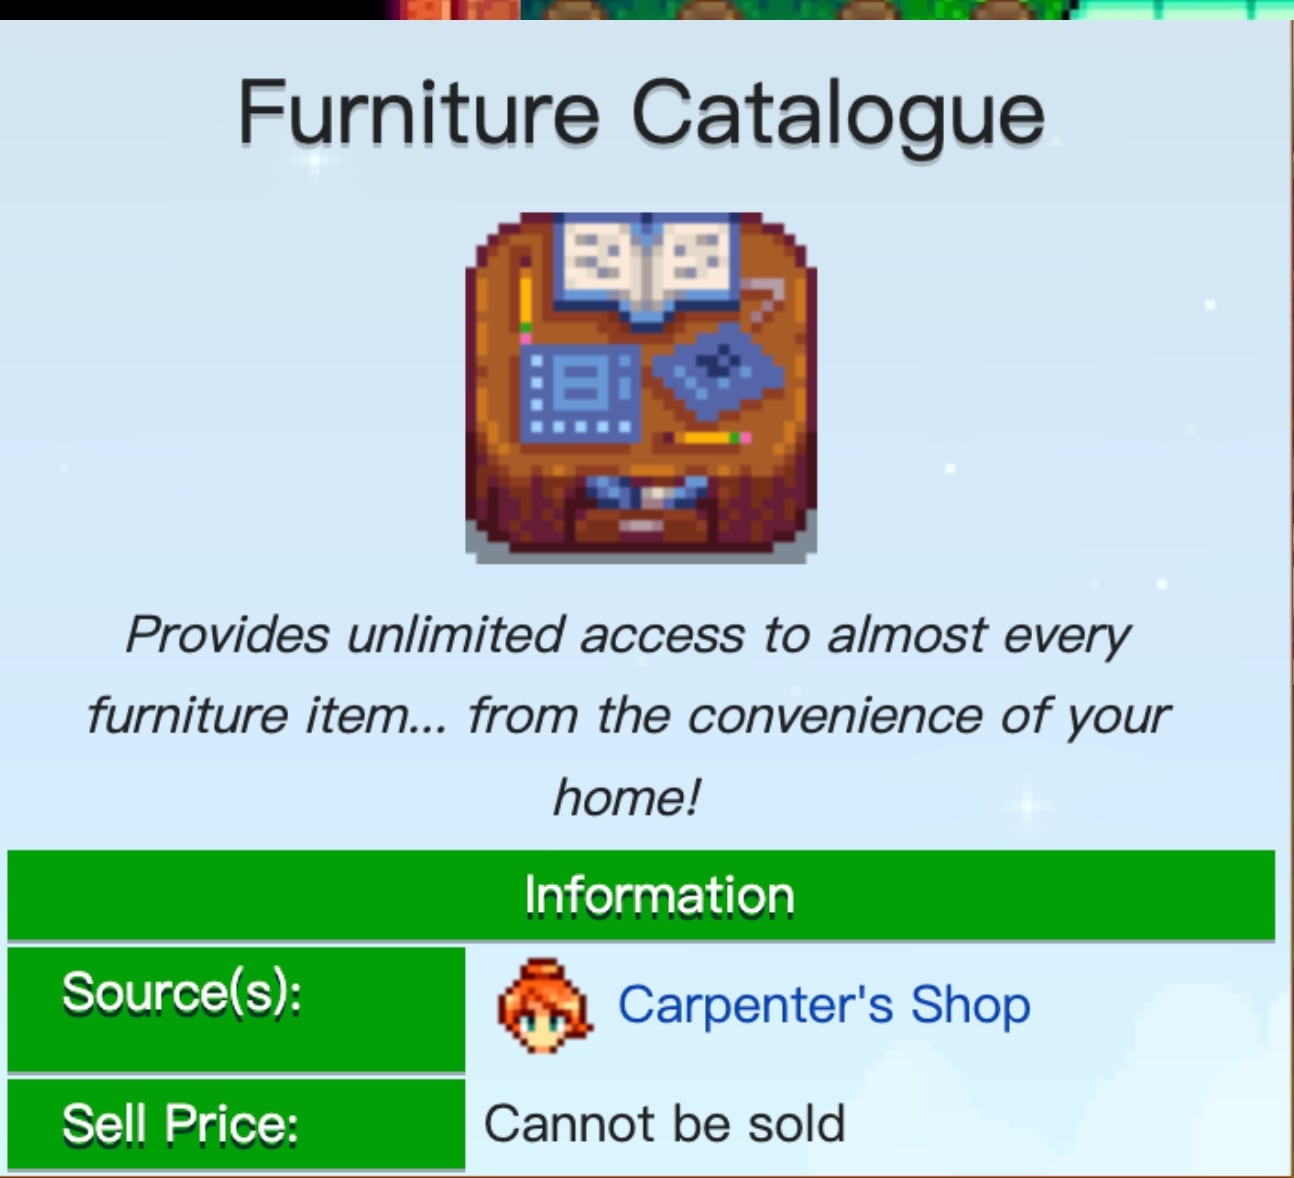 Image of the Furniture Catalogue